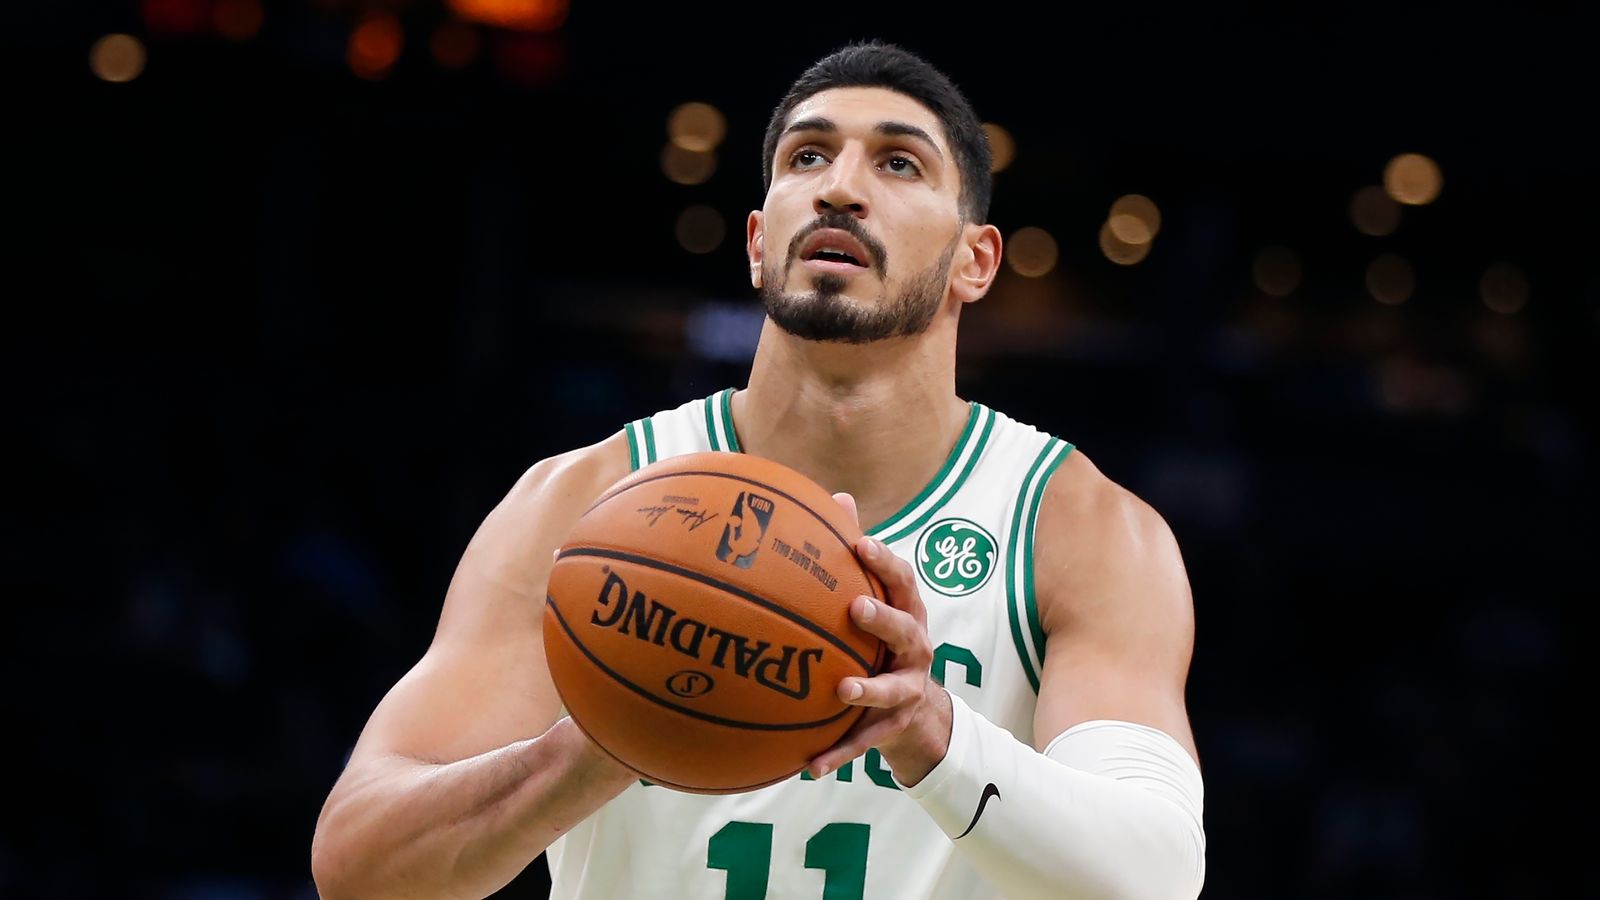 Enes Kanter felt encouraged to speak out against China after NBA supported players fighting other injustices 1